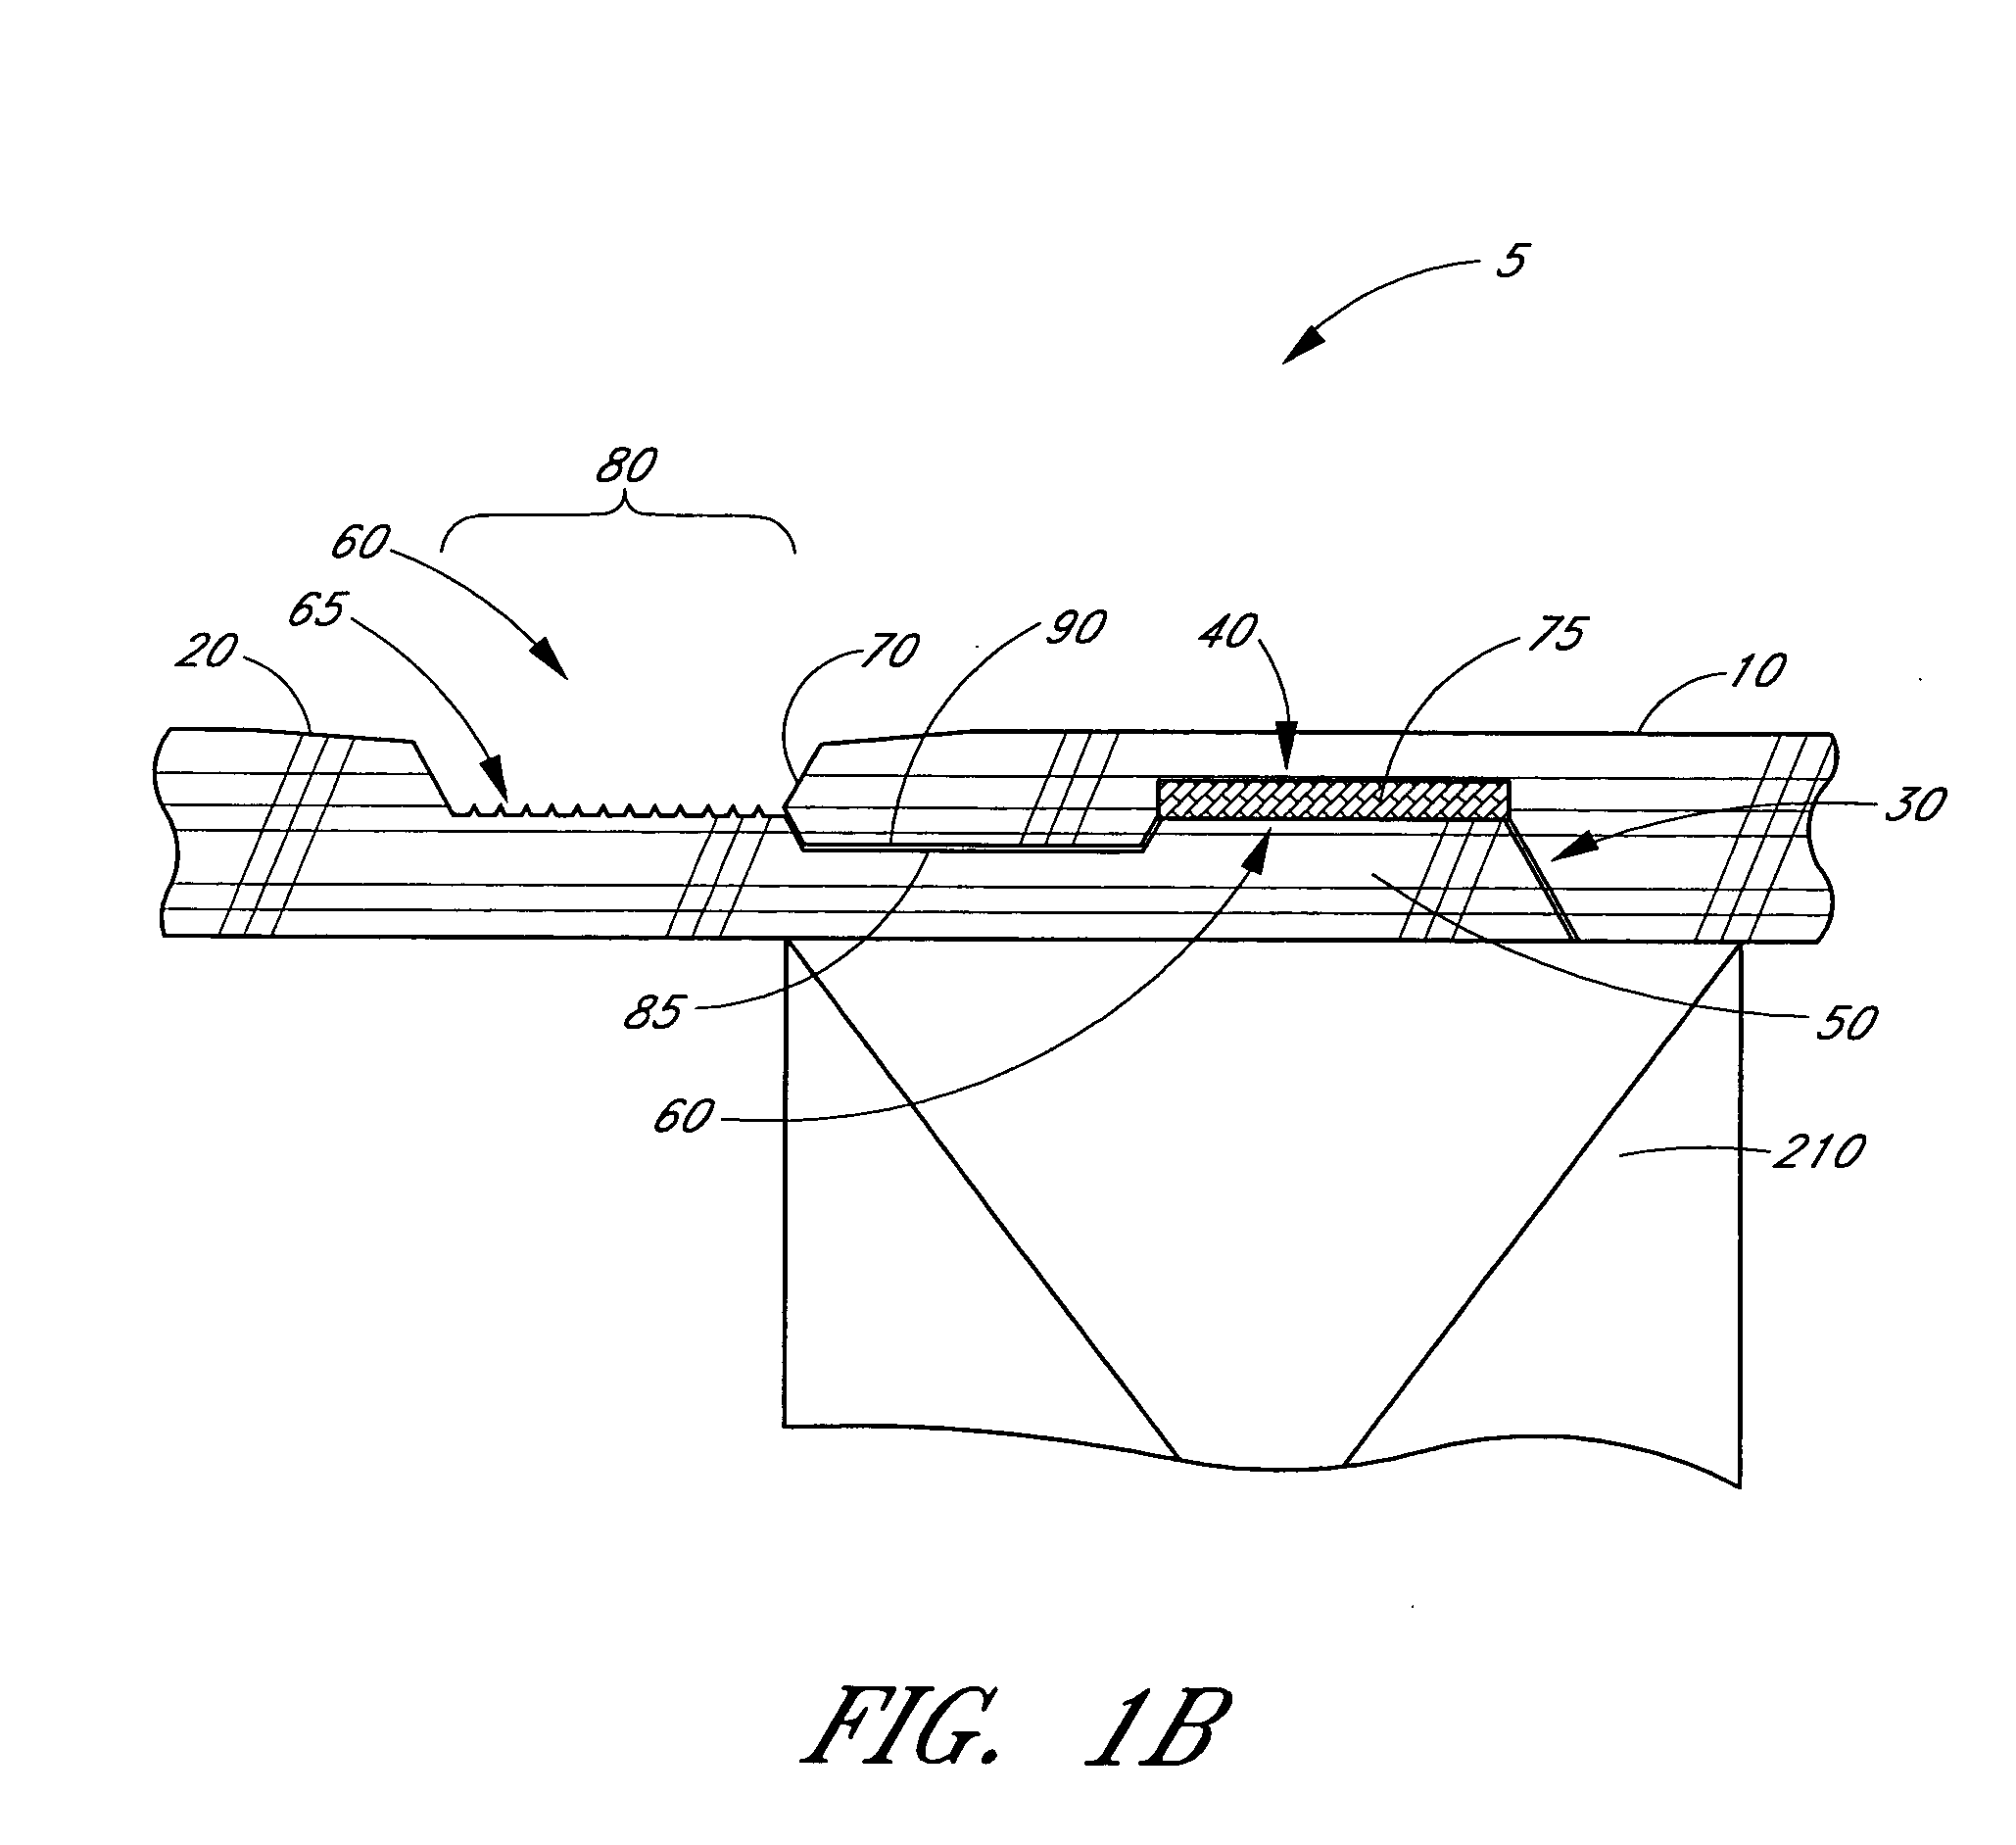 Building material and method of making and installing the same